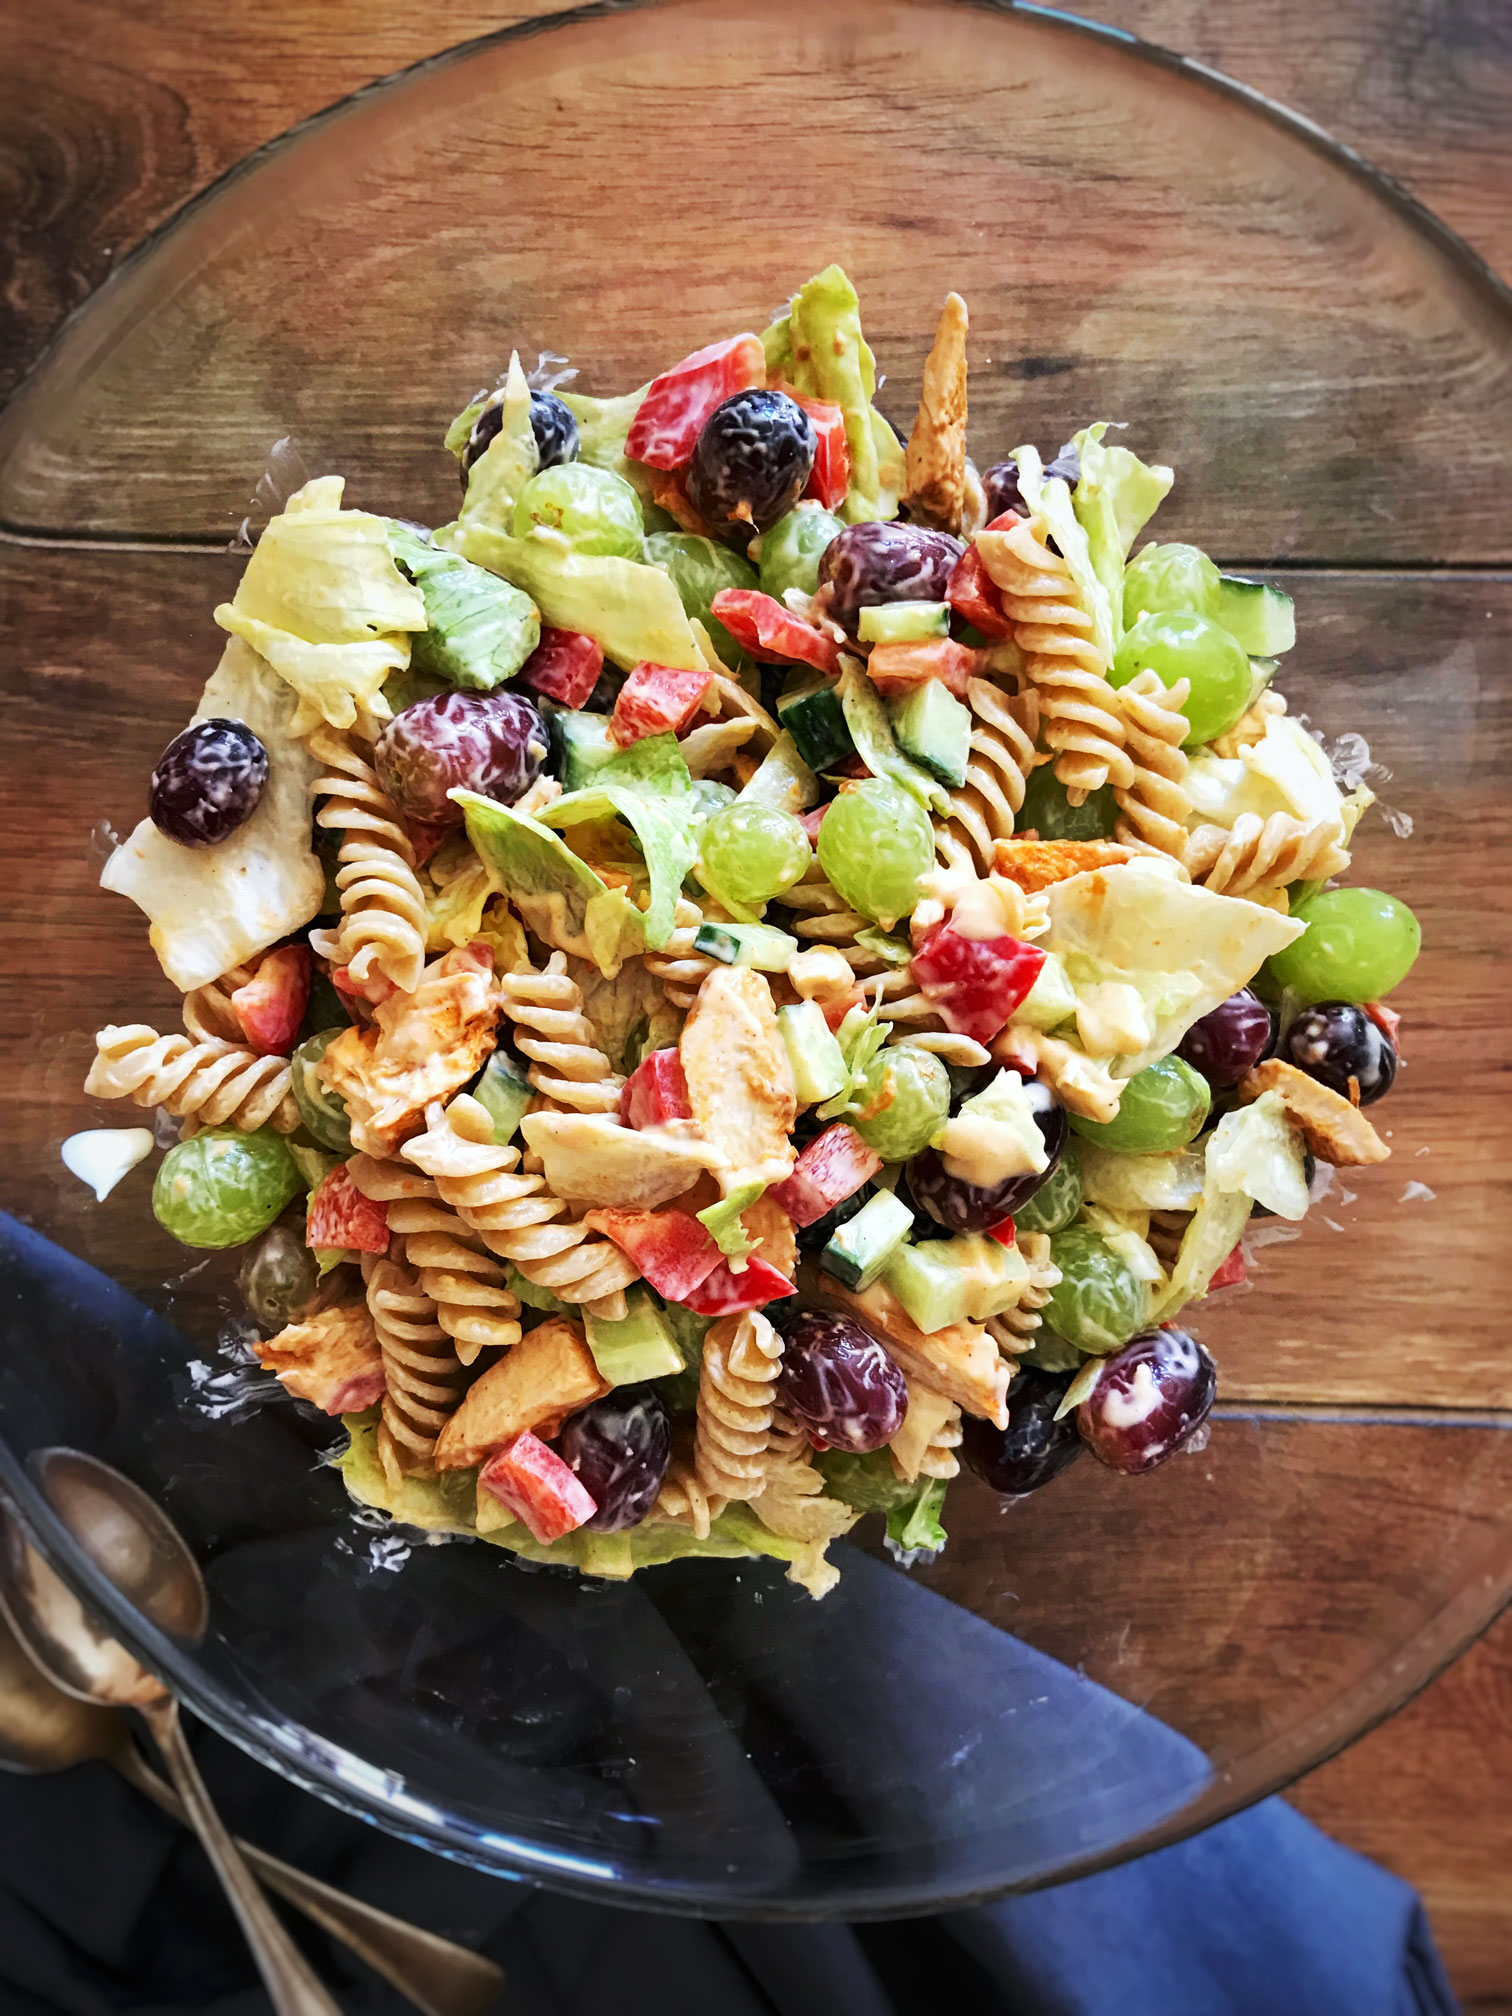 Indian spiced chicken and pasta salad